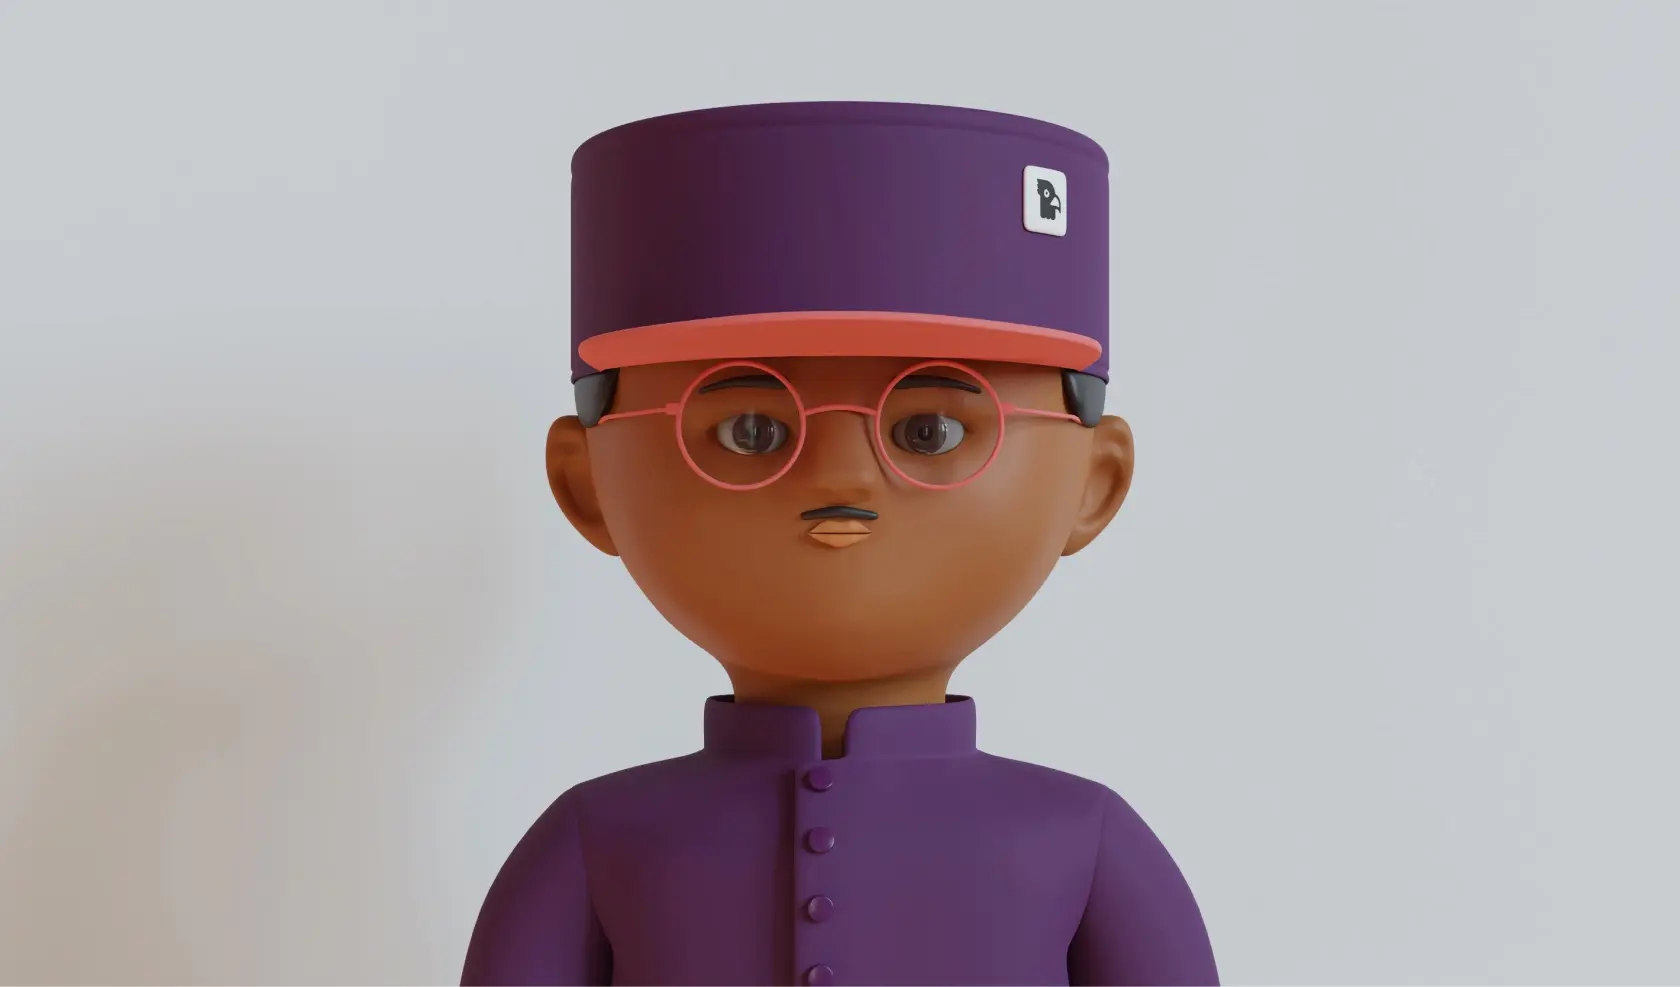 Stylized figure wearing a purple uniform with matching cap and pink-rimmed glasses, against a soft white background.